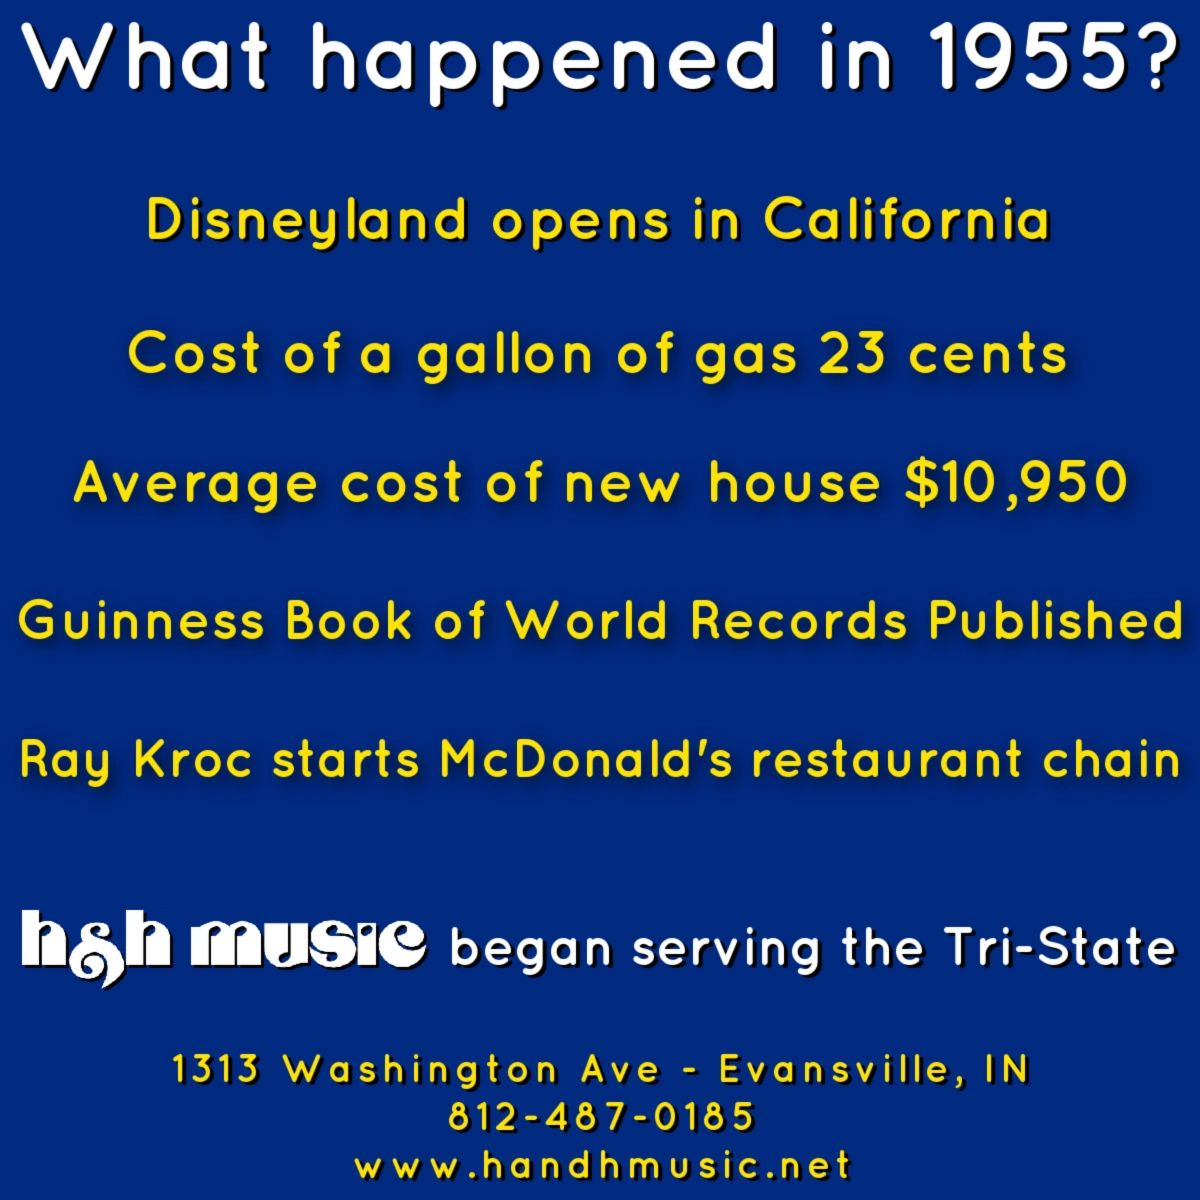 We've been helping the tri-state with all their musical needs since 1955! What were things like back then, you might ask? Here are some quick facts about that year! #HandHMusicServices #EvansvilleIndiana